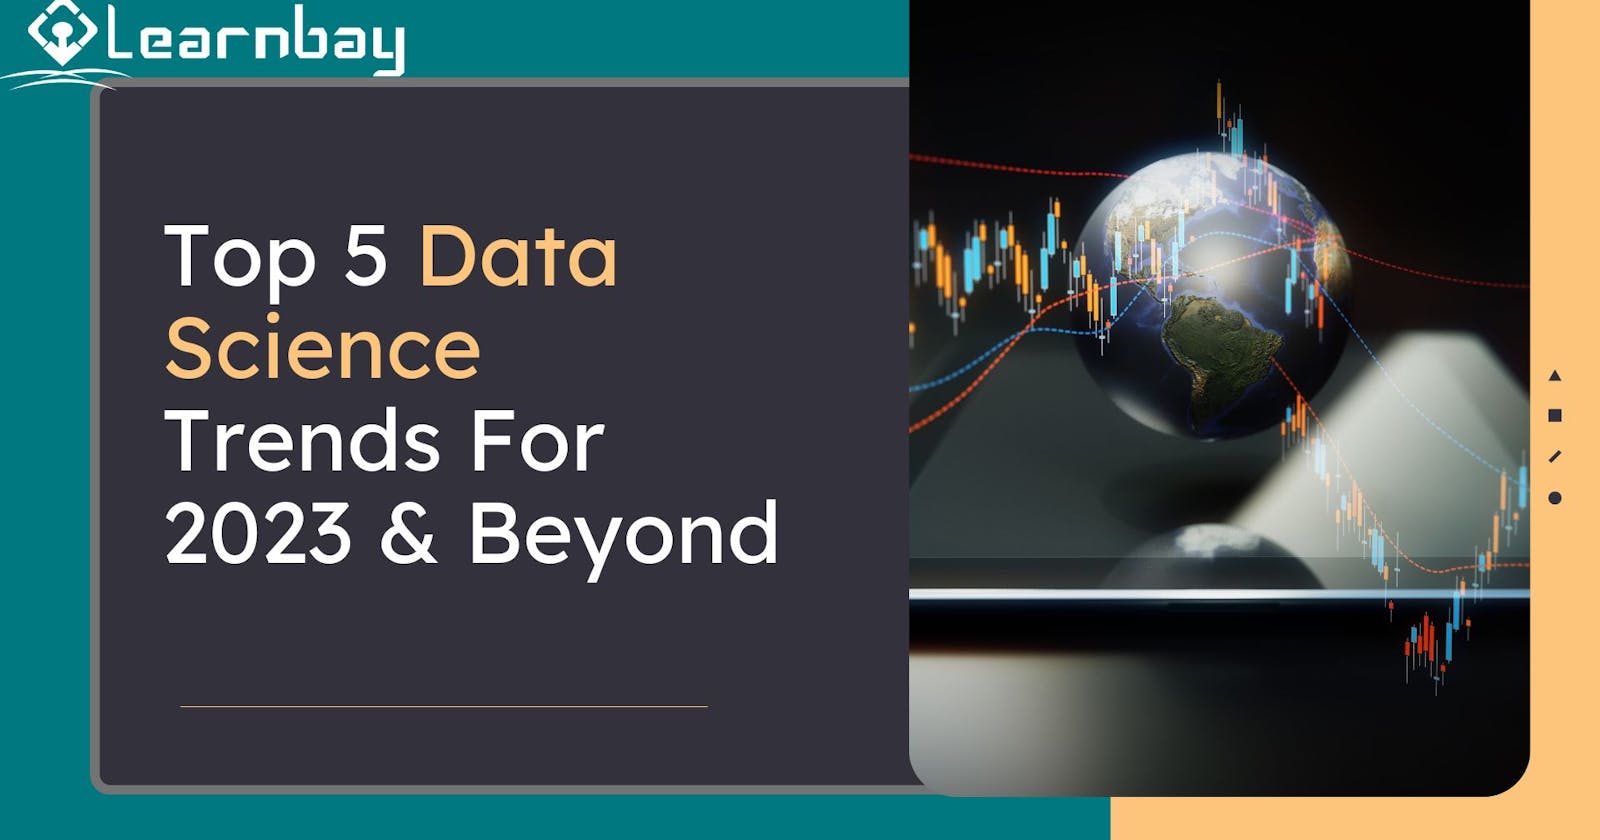 Top 5 Data Science Trends For 2023 & Beyond